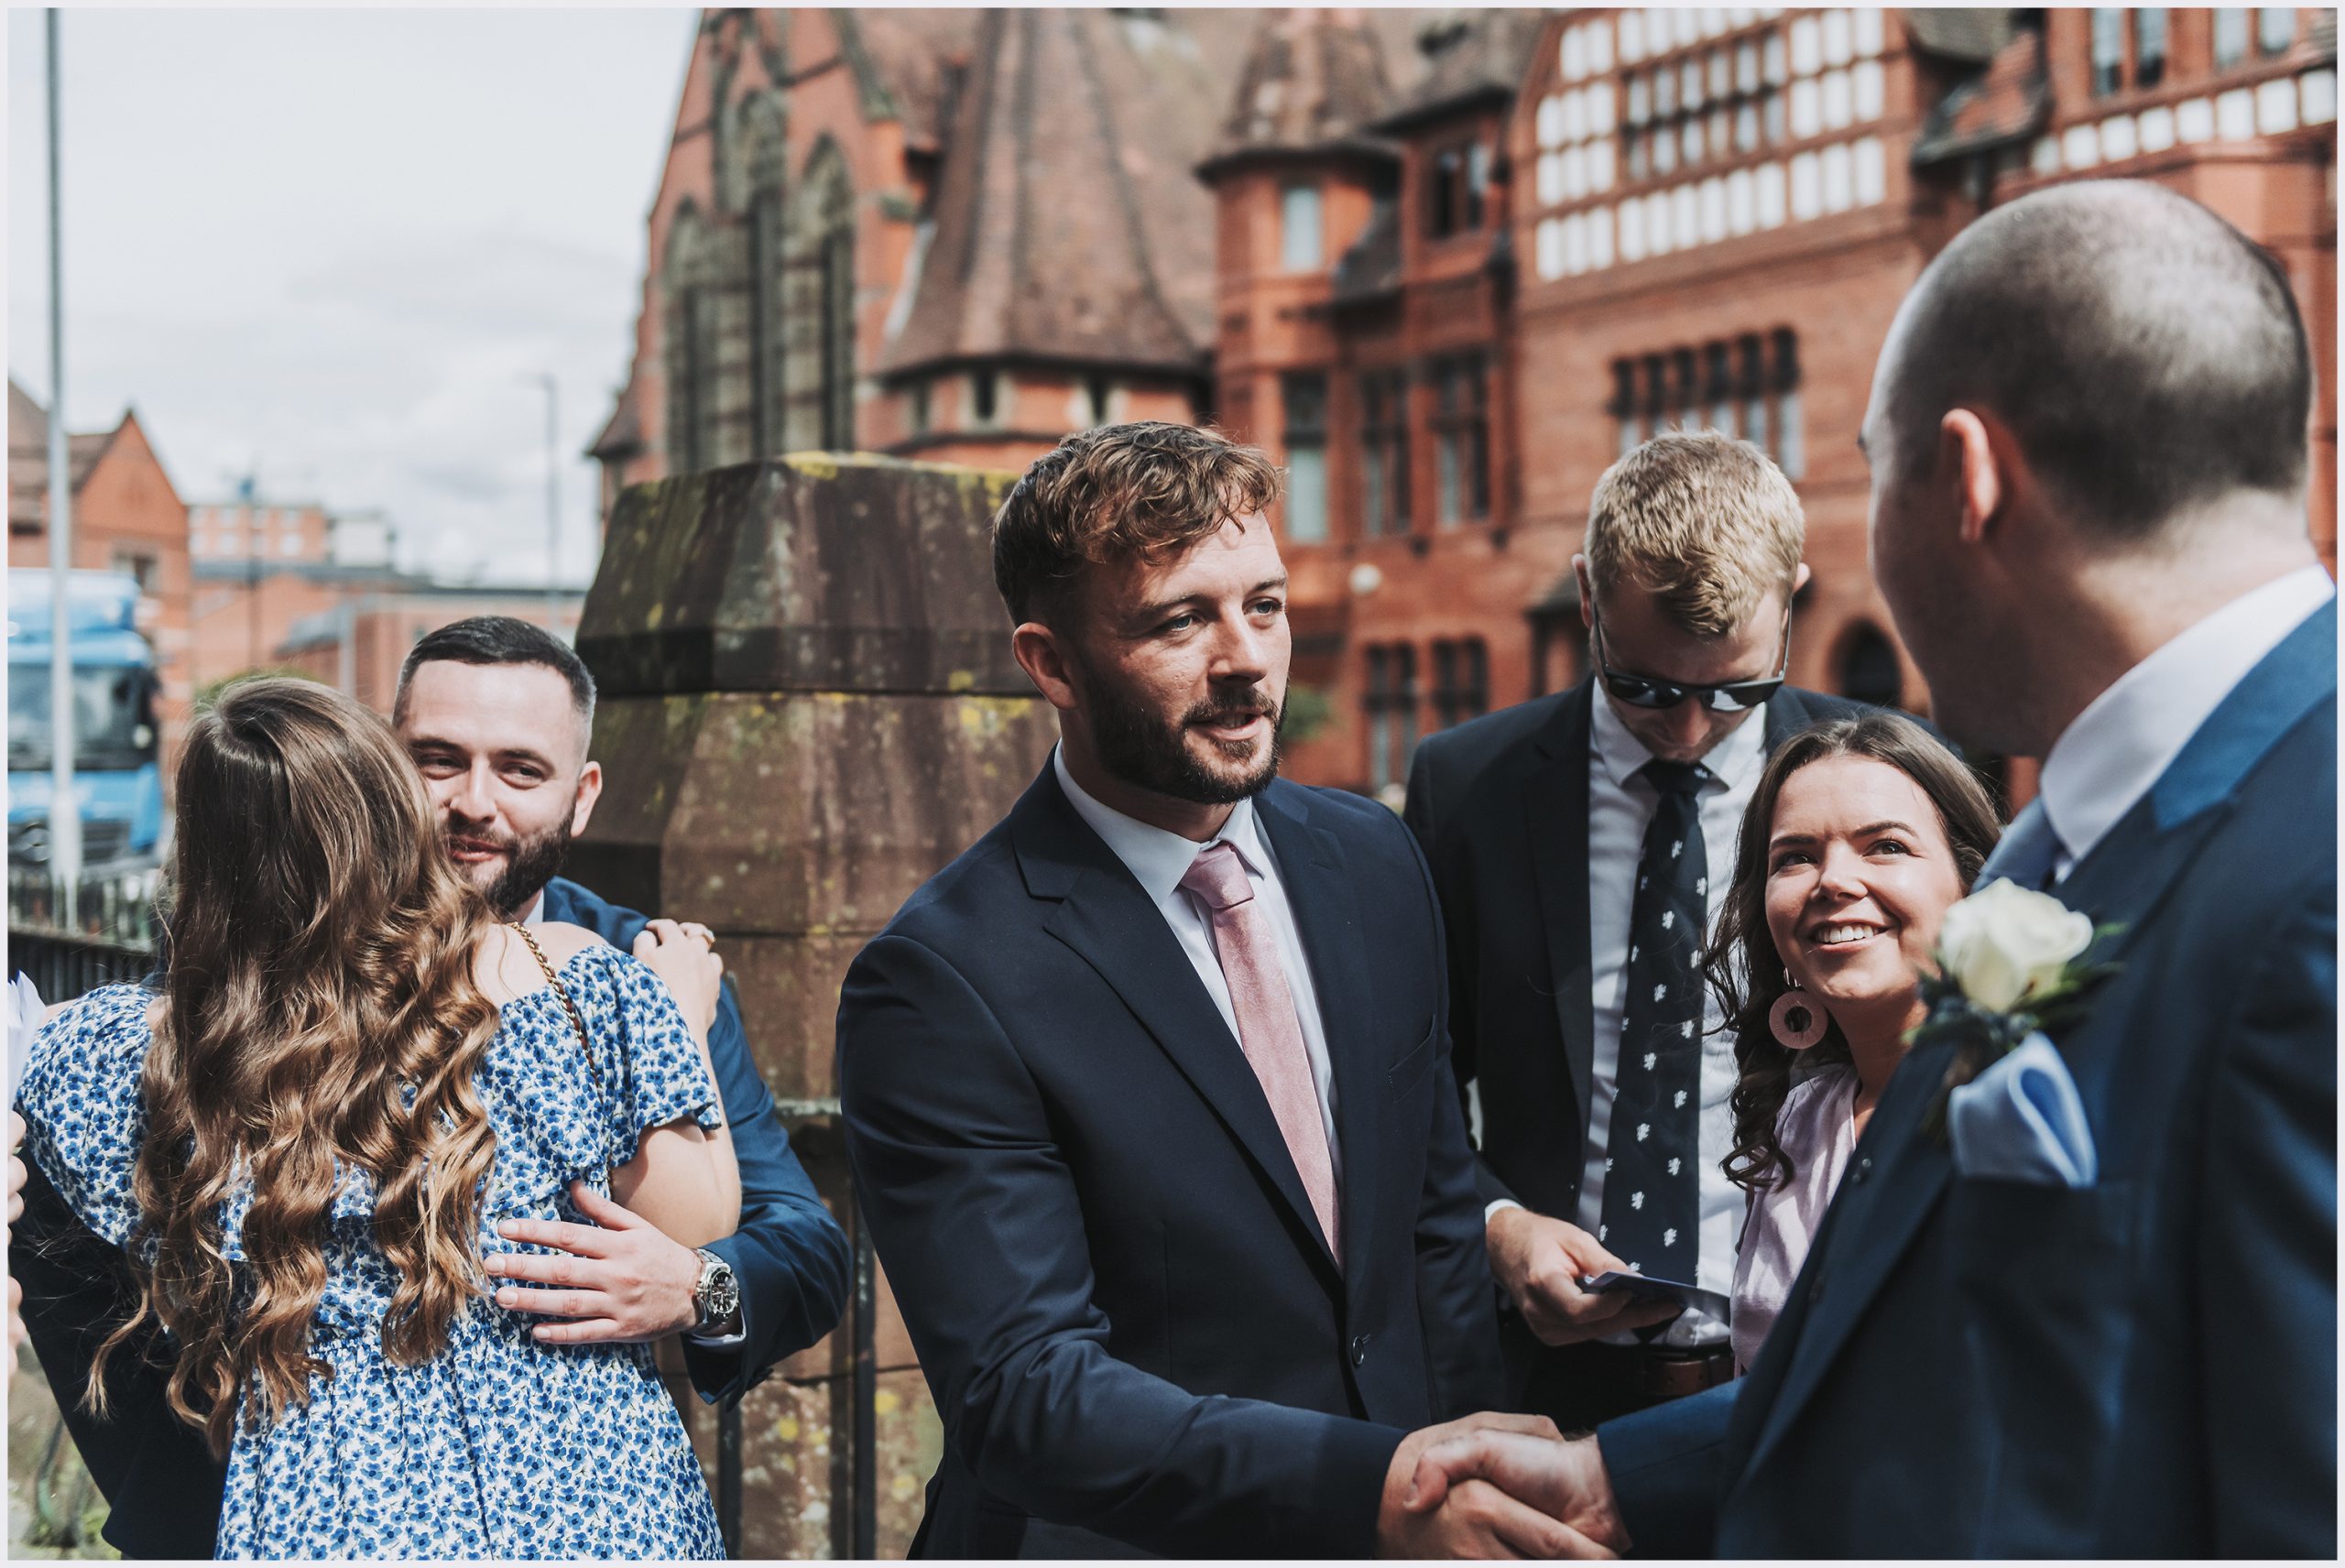 A wedding guest shakes the hand of one of the ushers outside the church where is about to get married.  Image captured by Helena Jayne Photography Chester wedding photographer